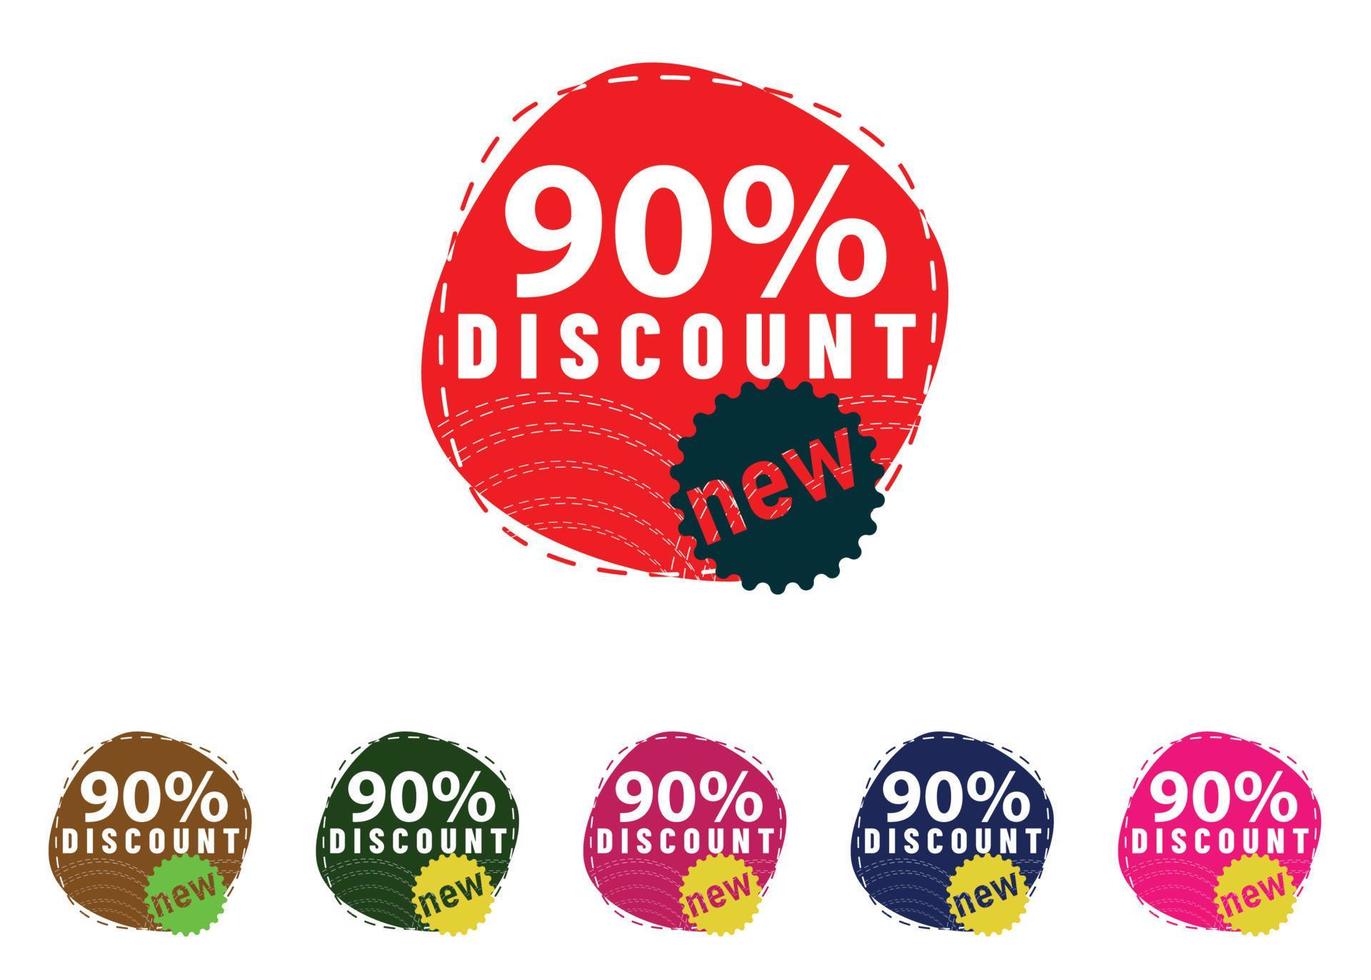 90 percent discount new offer logo and icon design vector